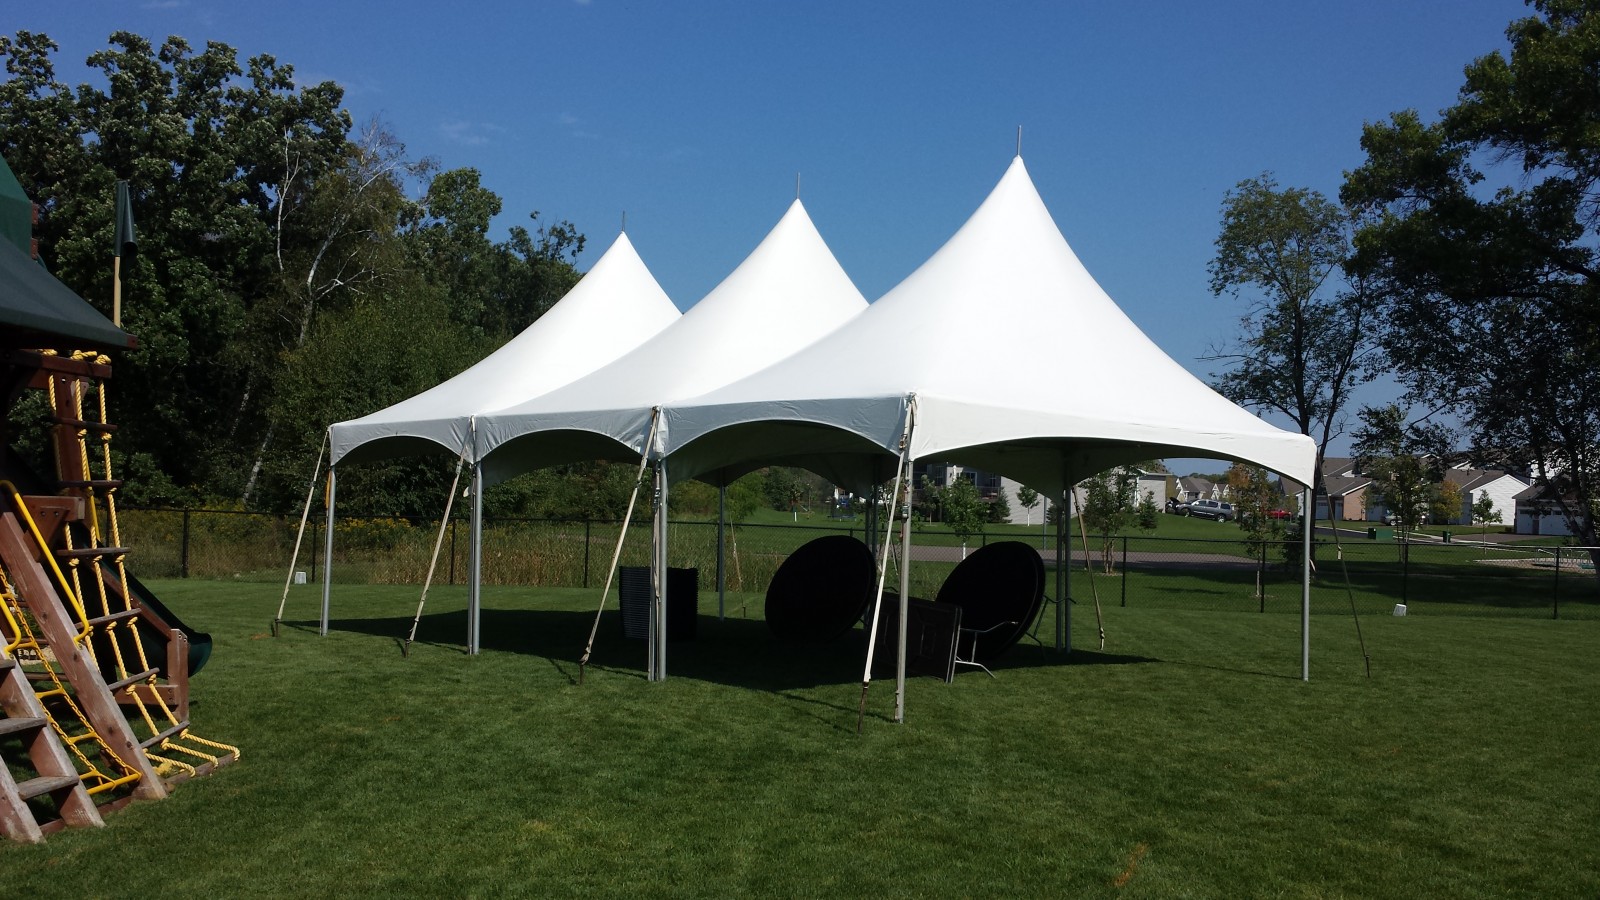 60' x 20' Tent Rental for graduation party or wedding